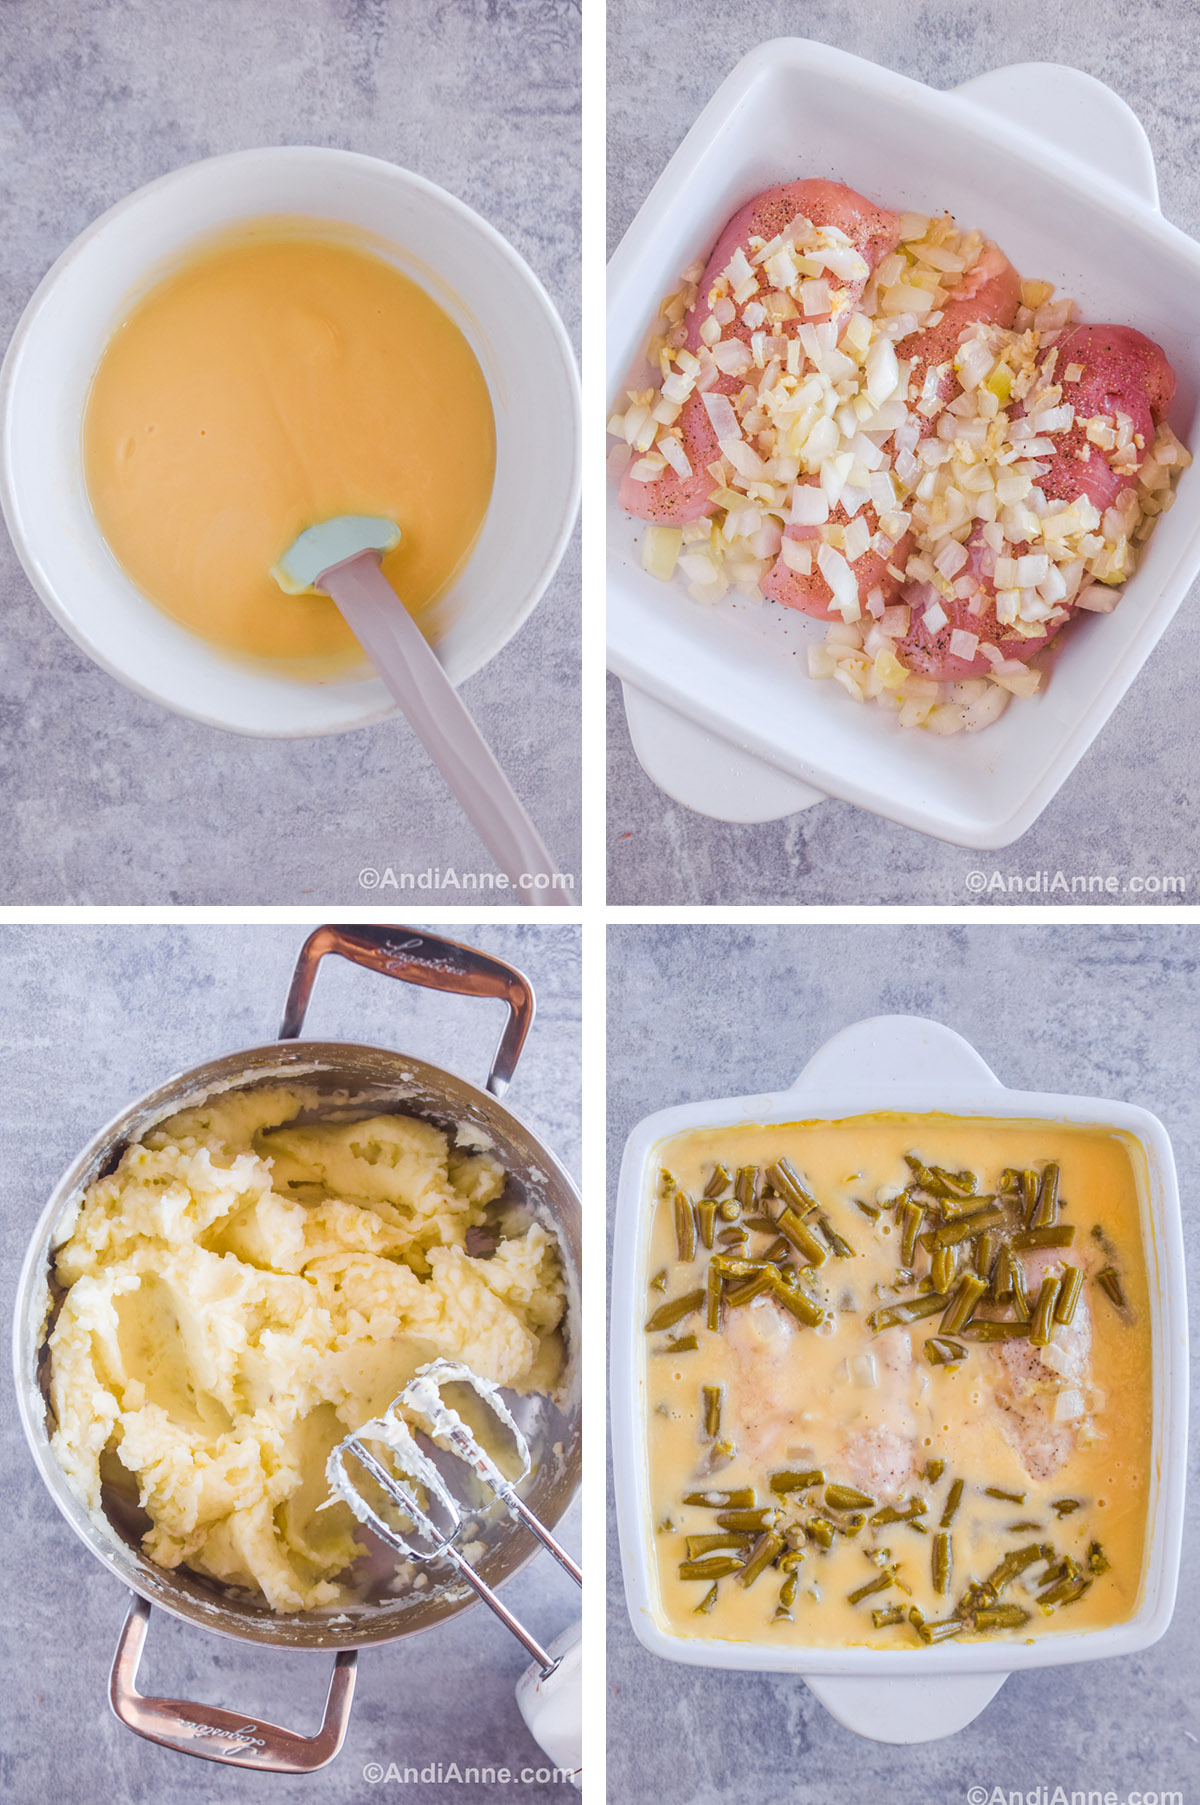 Four images showing steps to make the recipe. First is white bowl with yellow liquid and a spatula. Second is raw chicken breasts with chopped onion on top in a baking dish. Third is mashed potatoes in a pot with an electric mixer. Fourth is cream of chicken soup with chicken breasts and green beans dumped on top.